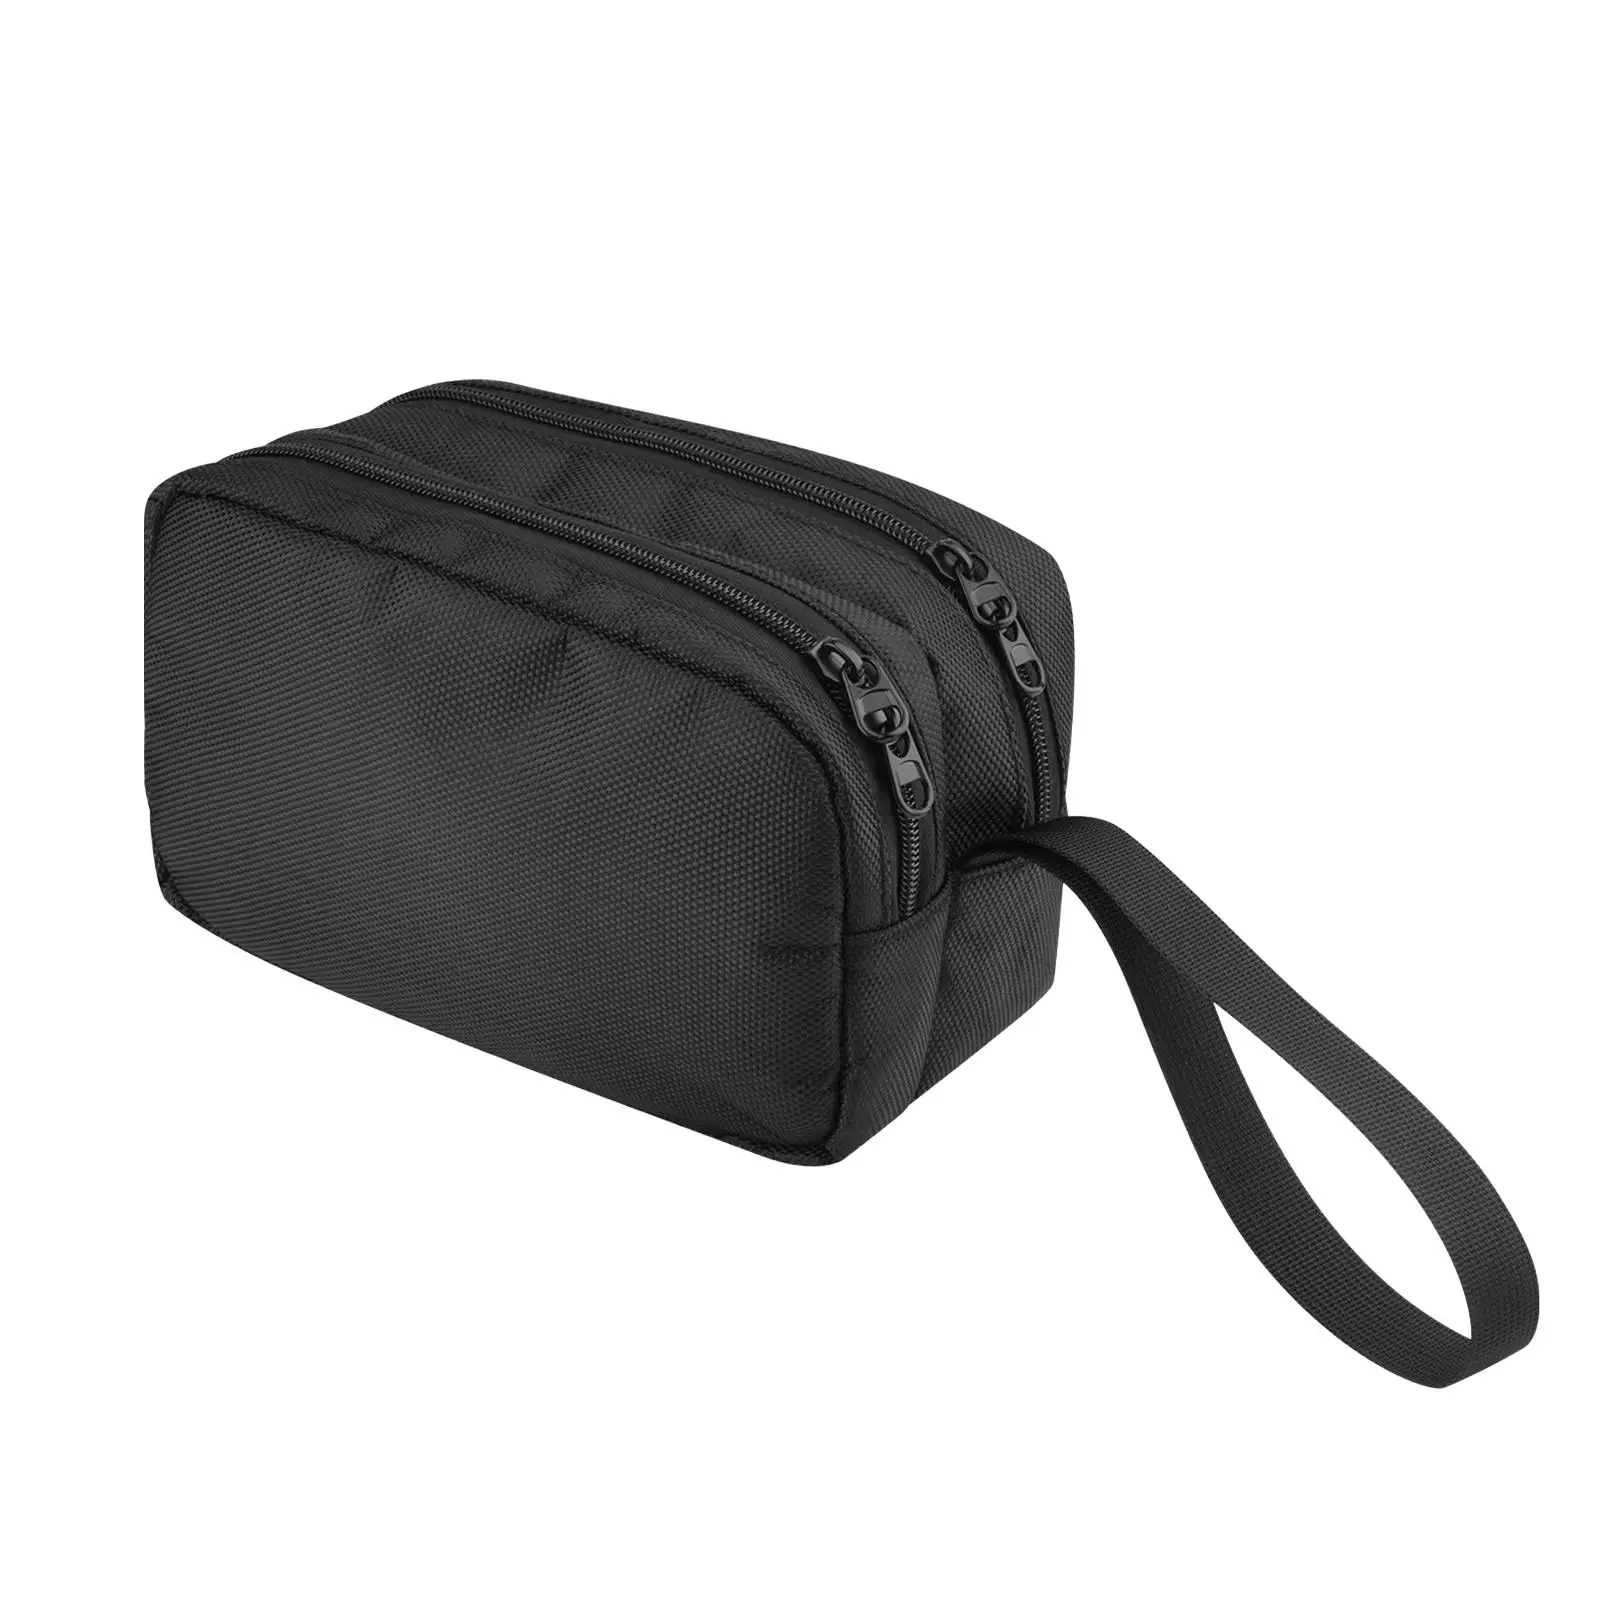 Protable Protect Case Waterproof Two Dual Zippers Design Outdoor Storage Bag Black Carrying Case for USB Cable Accessories Wires